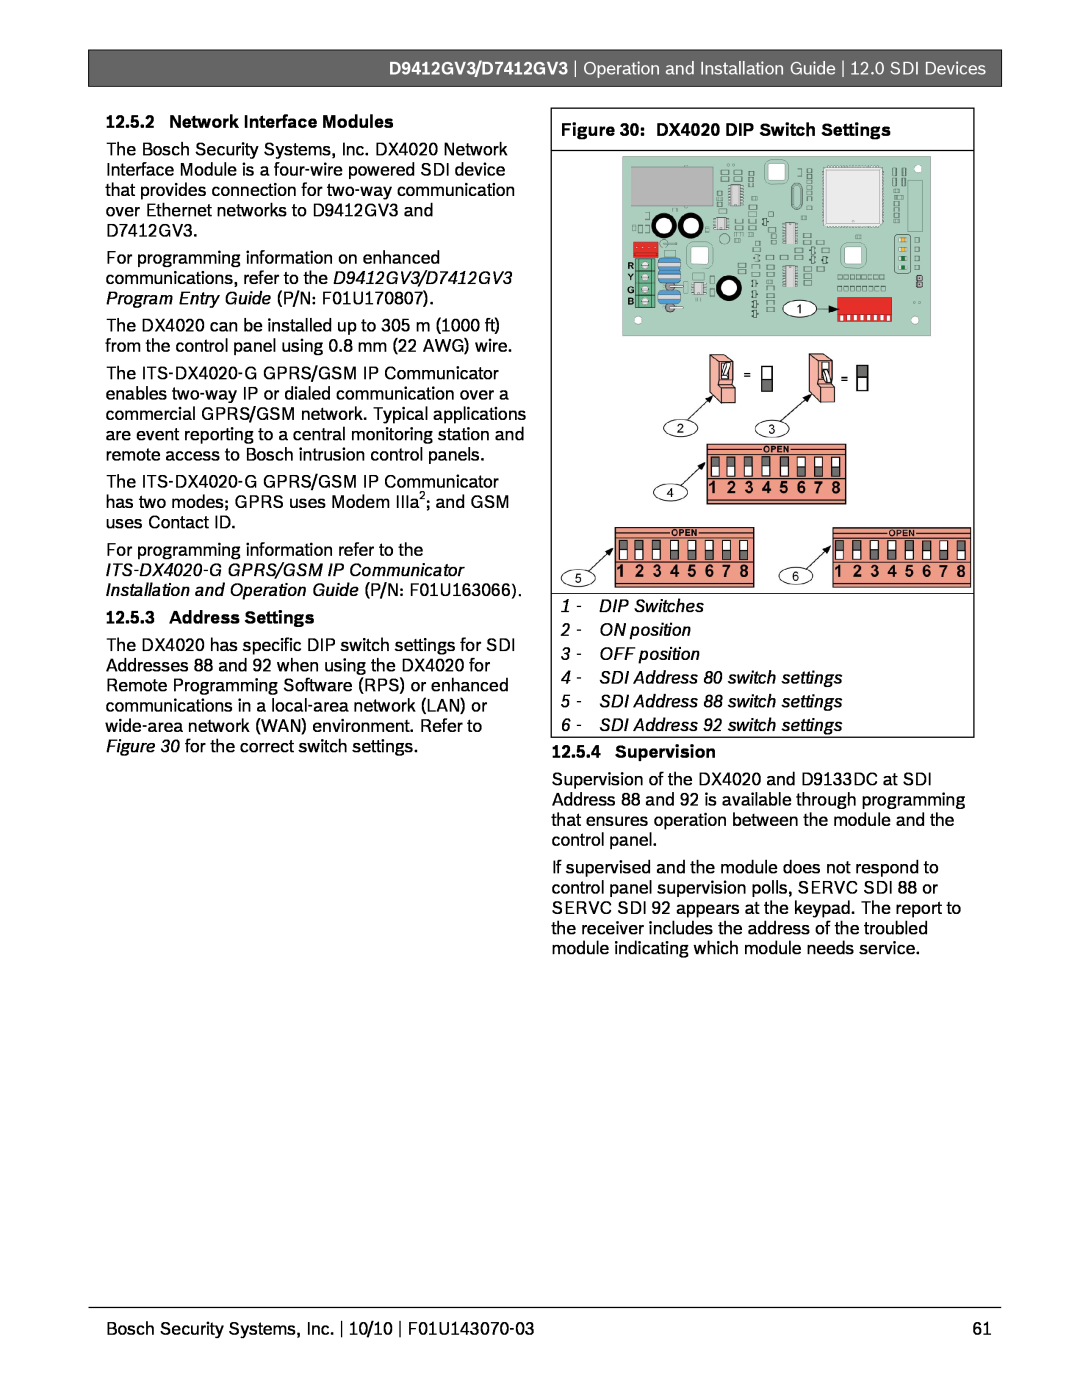 Bosch Appliances D7412GV3, D9412GV3 Network Interface Modules, Address Settings, DX4020 DIP Switch Settings, Supervision 